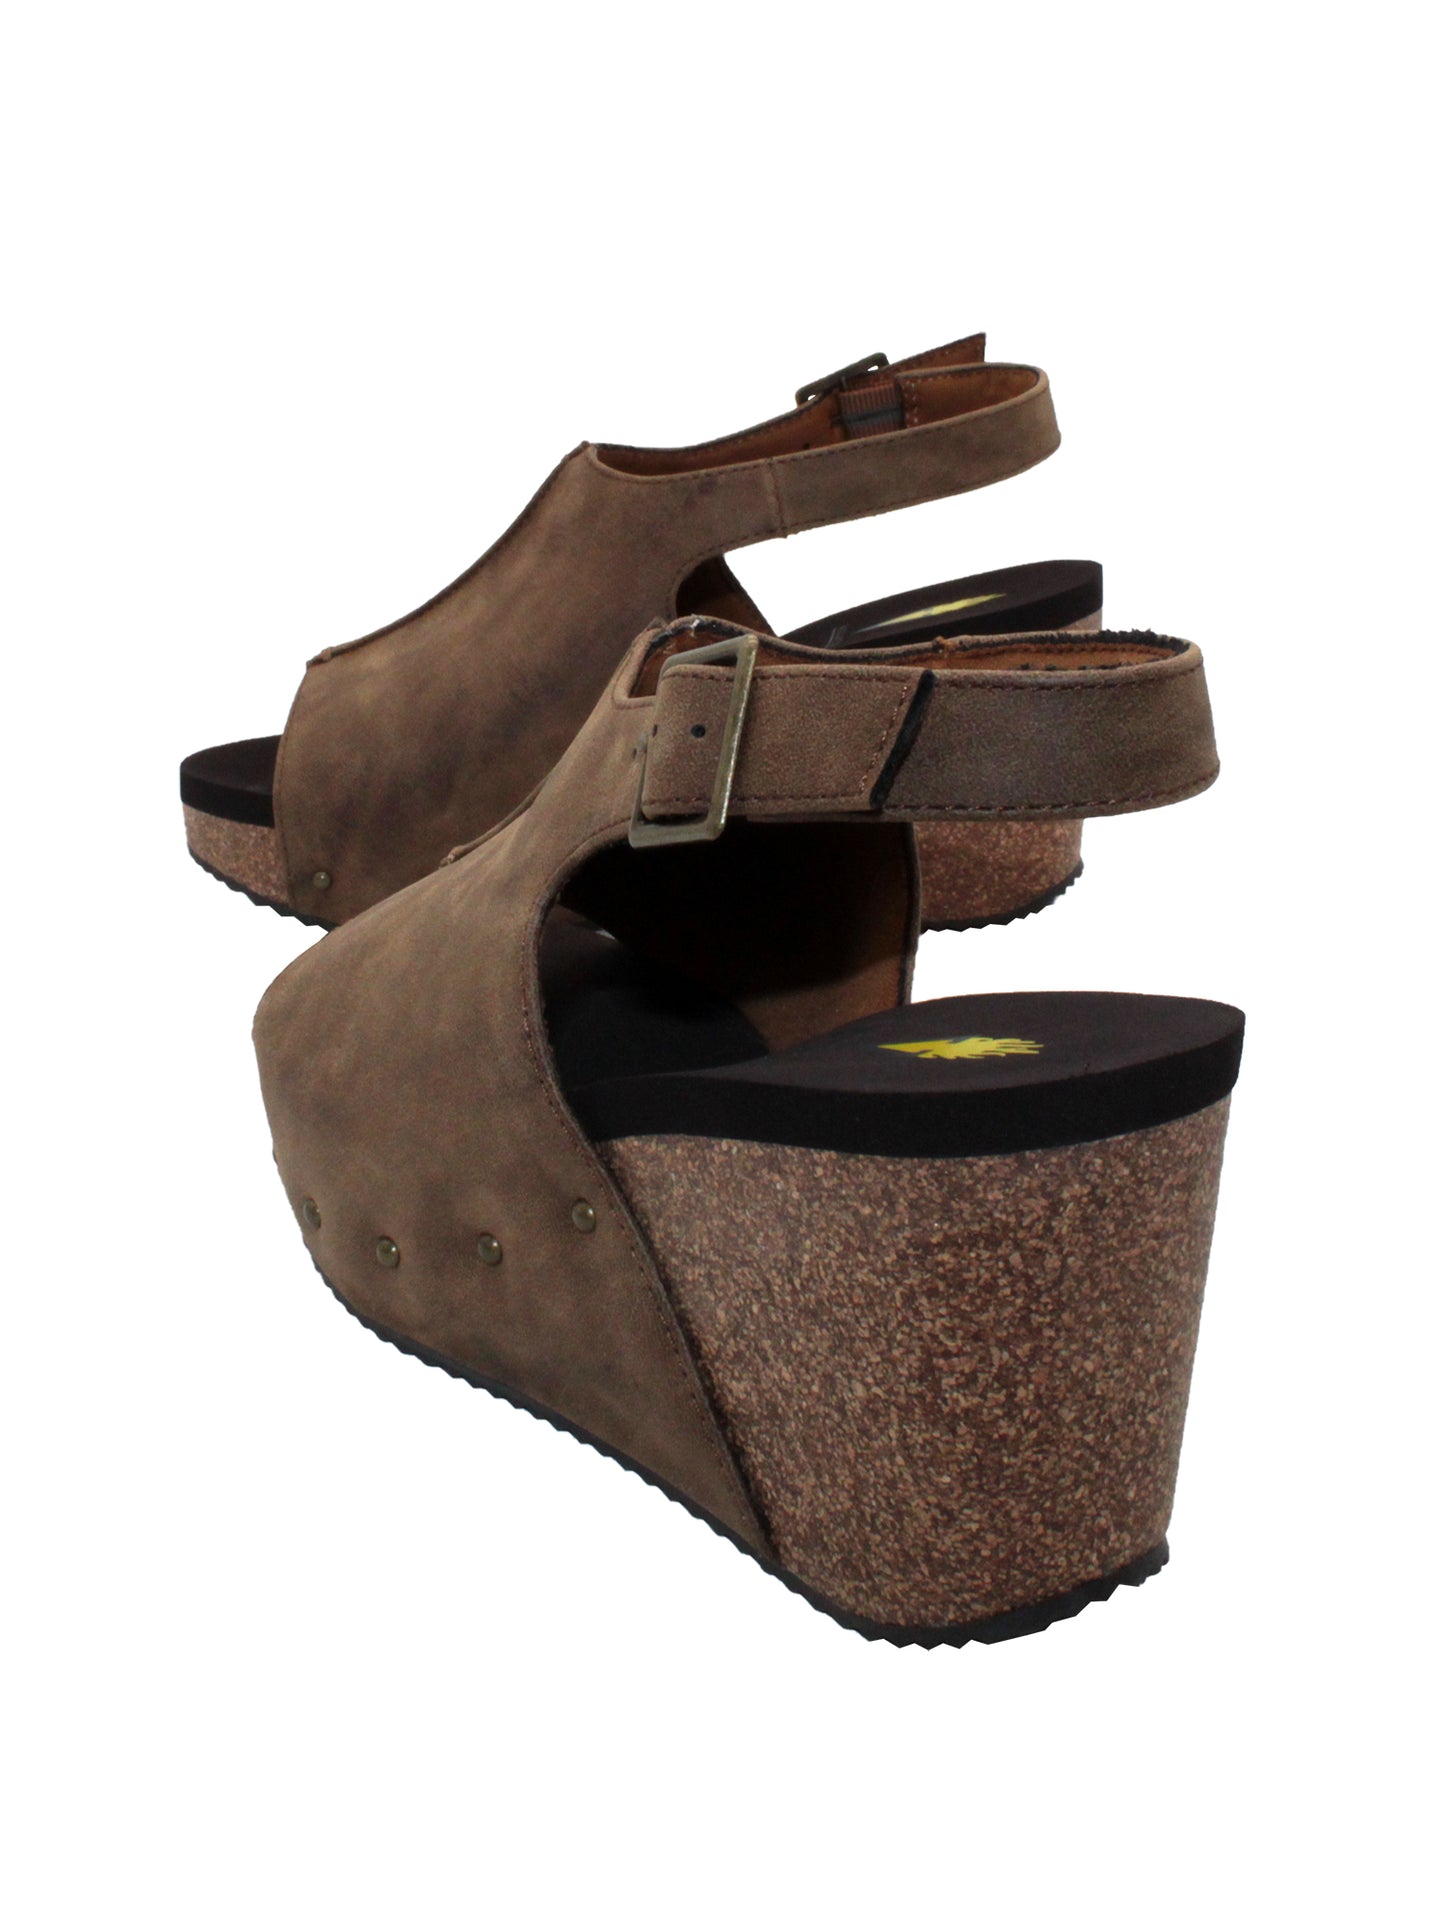 One of Volatile’s classic signature styles, the brown Division wedge sandal brings ultra-comfort to casual fashion like no other. The adjustable ankle strap offers stability, the padded lining and signature ultra-comfort EVA insole keeps feet feeling rested even after a full day of adventure, and the rubber traction outsole means these are safe for walking on any surface. Pack these for your next trip to wear with shorts for sightseeing and a flowy dress for special events. back